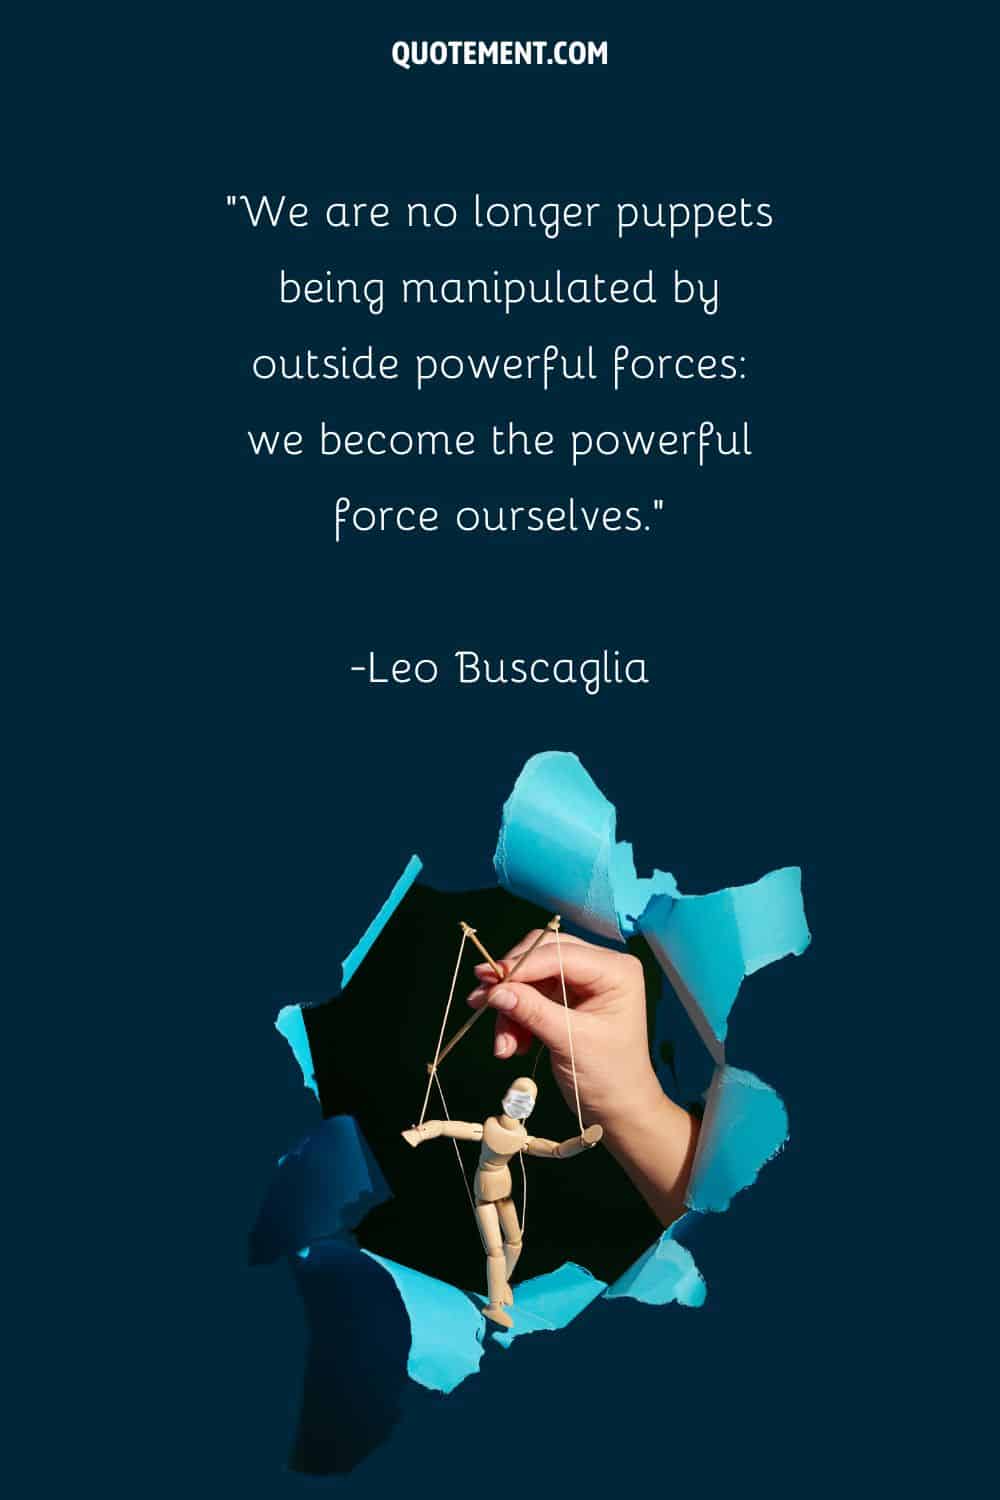 puppet in a hand representing quote on manipulation